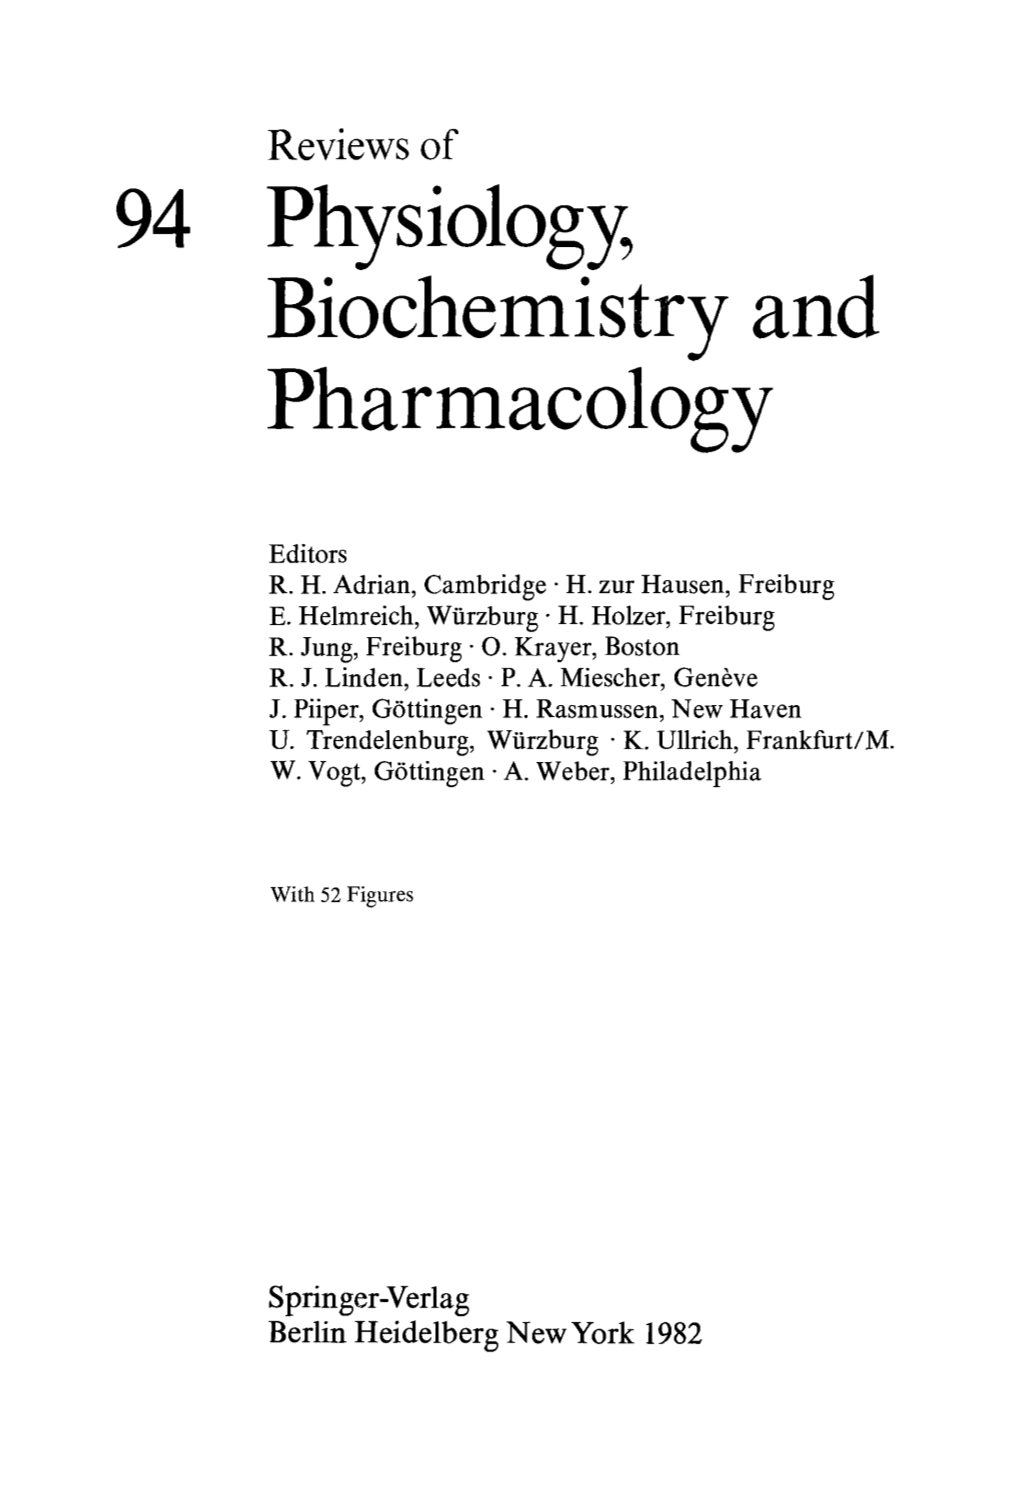 94 Physiology, Biochemistry and Pharmacology